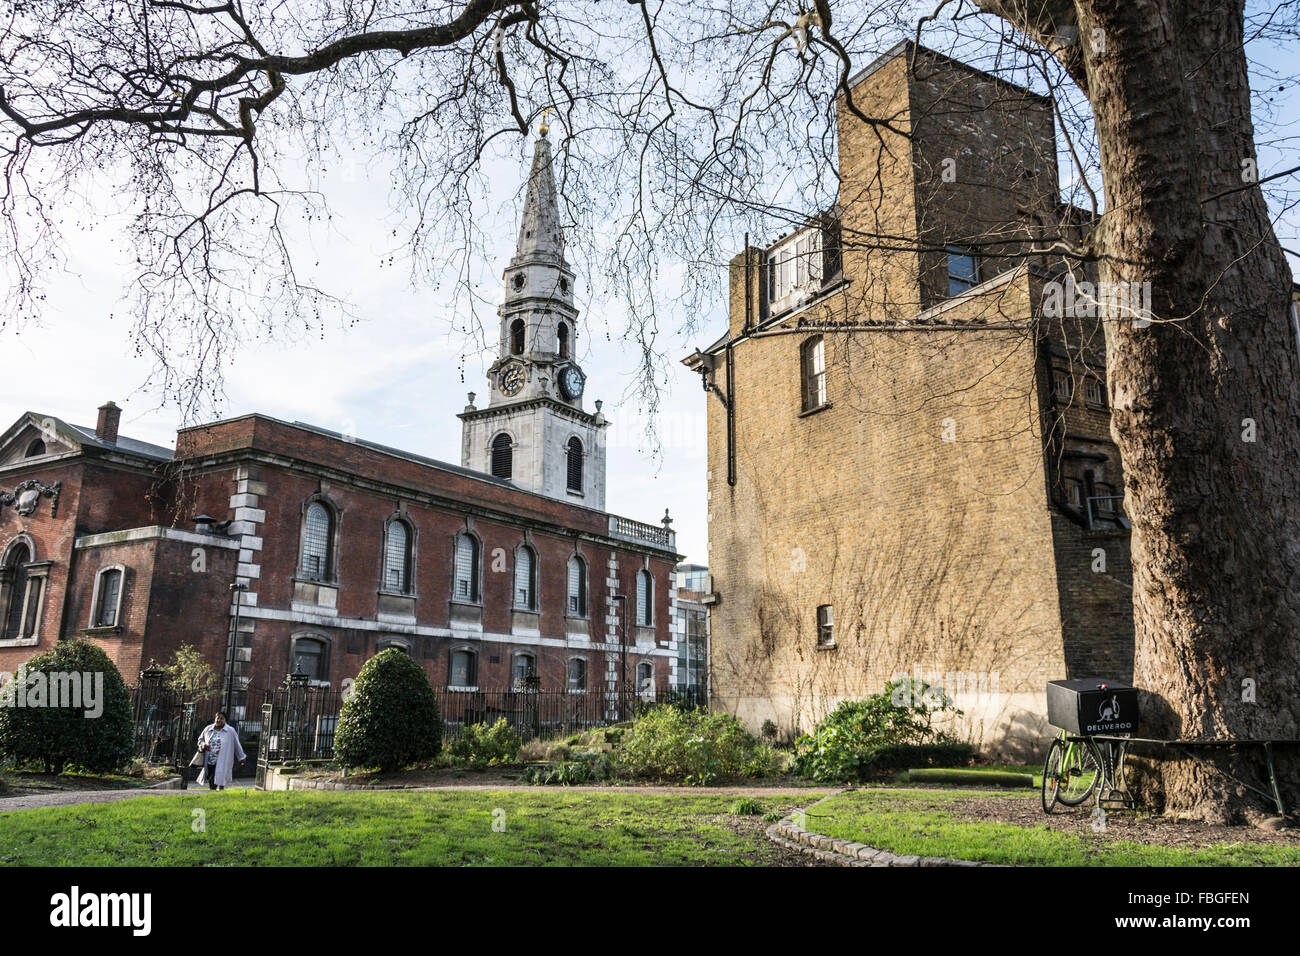 St George the Martyr church and graveyard alongside the former site of the Marshalsea Prison, London. Stock Photo